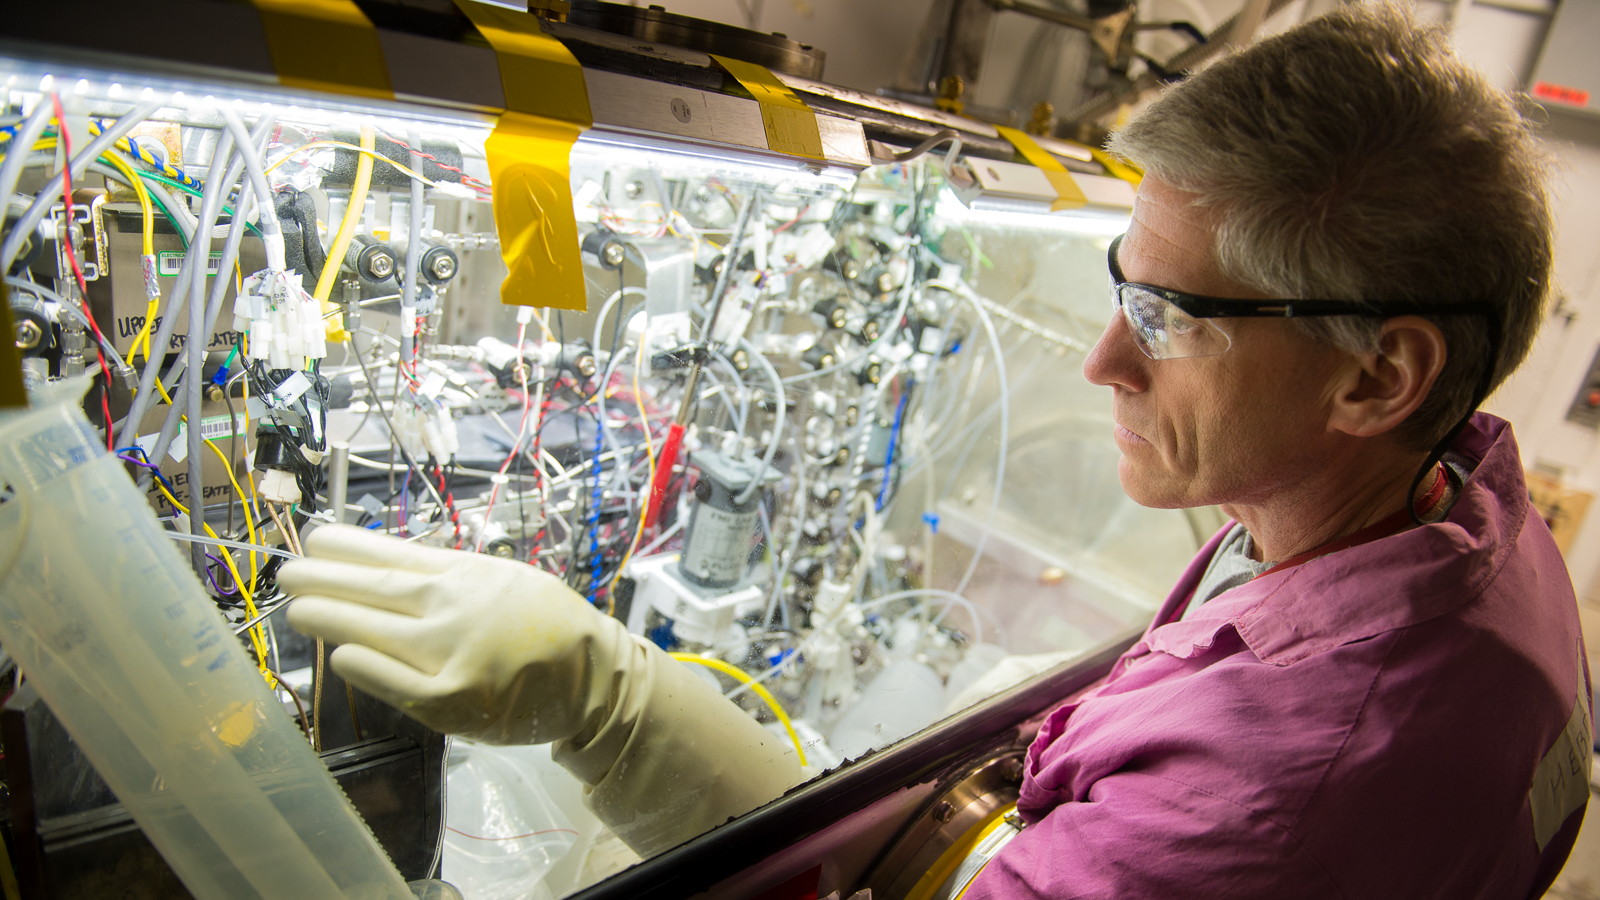 Scientific associate James Byrnes performs maintenance on a remote system that is used to recover molybdenum-99 from an irradiated target in a process recently demonstrated by Argonne. The operation is performed remotely due to high radiation fields in the target. (Photo by Wes Agresta.)